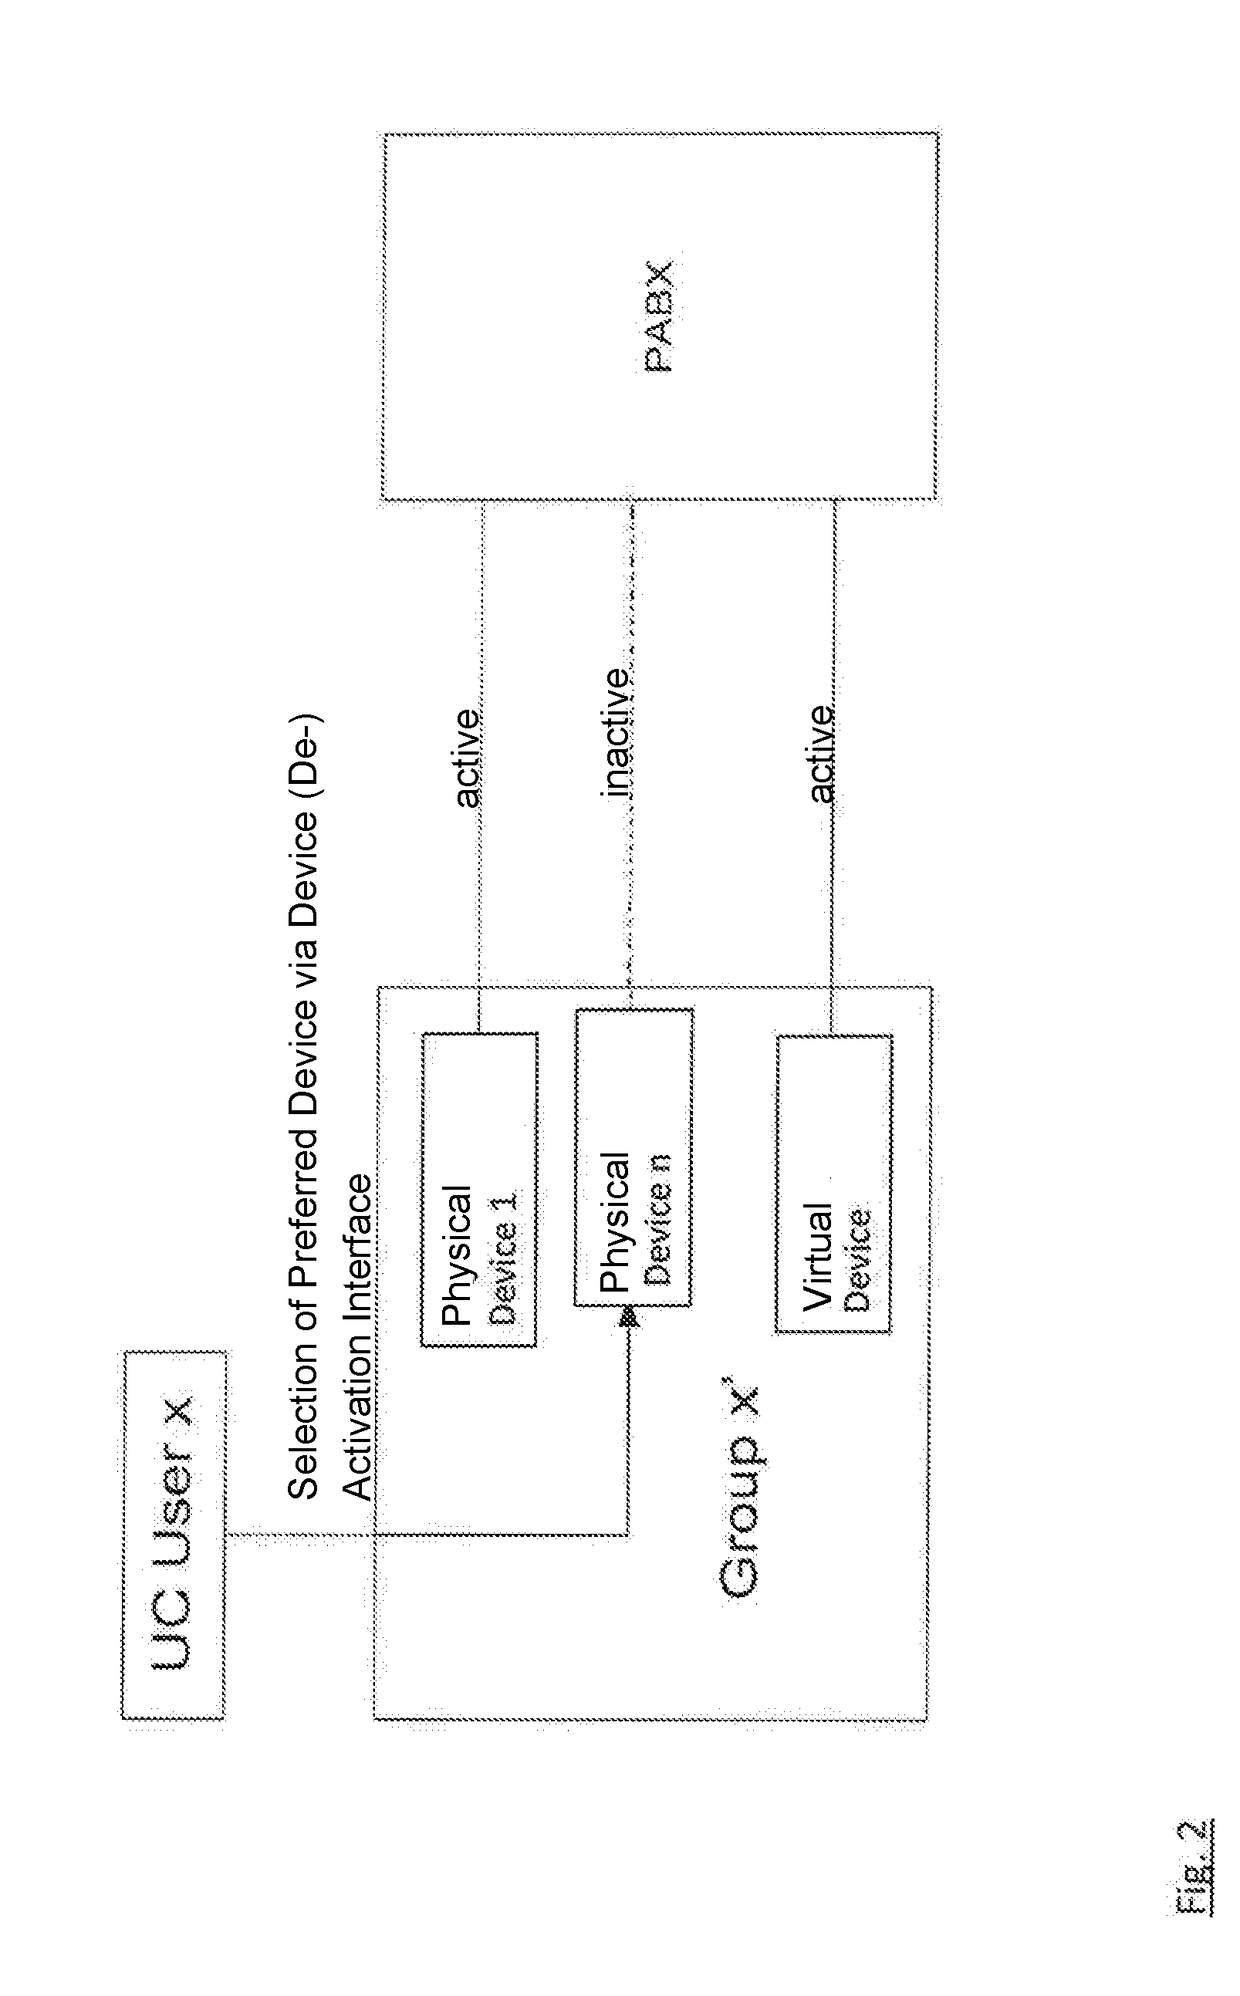 Integrating a communication terminal as the preferred device in a static communication system configuration